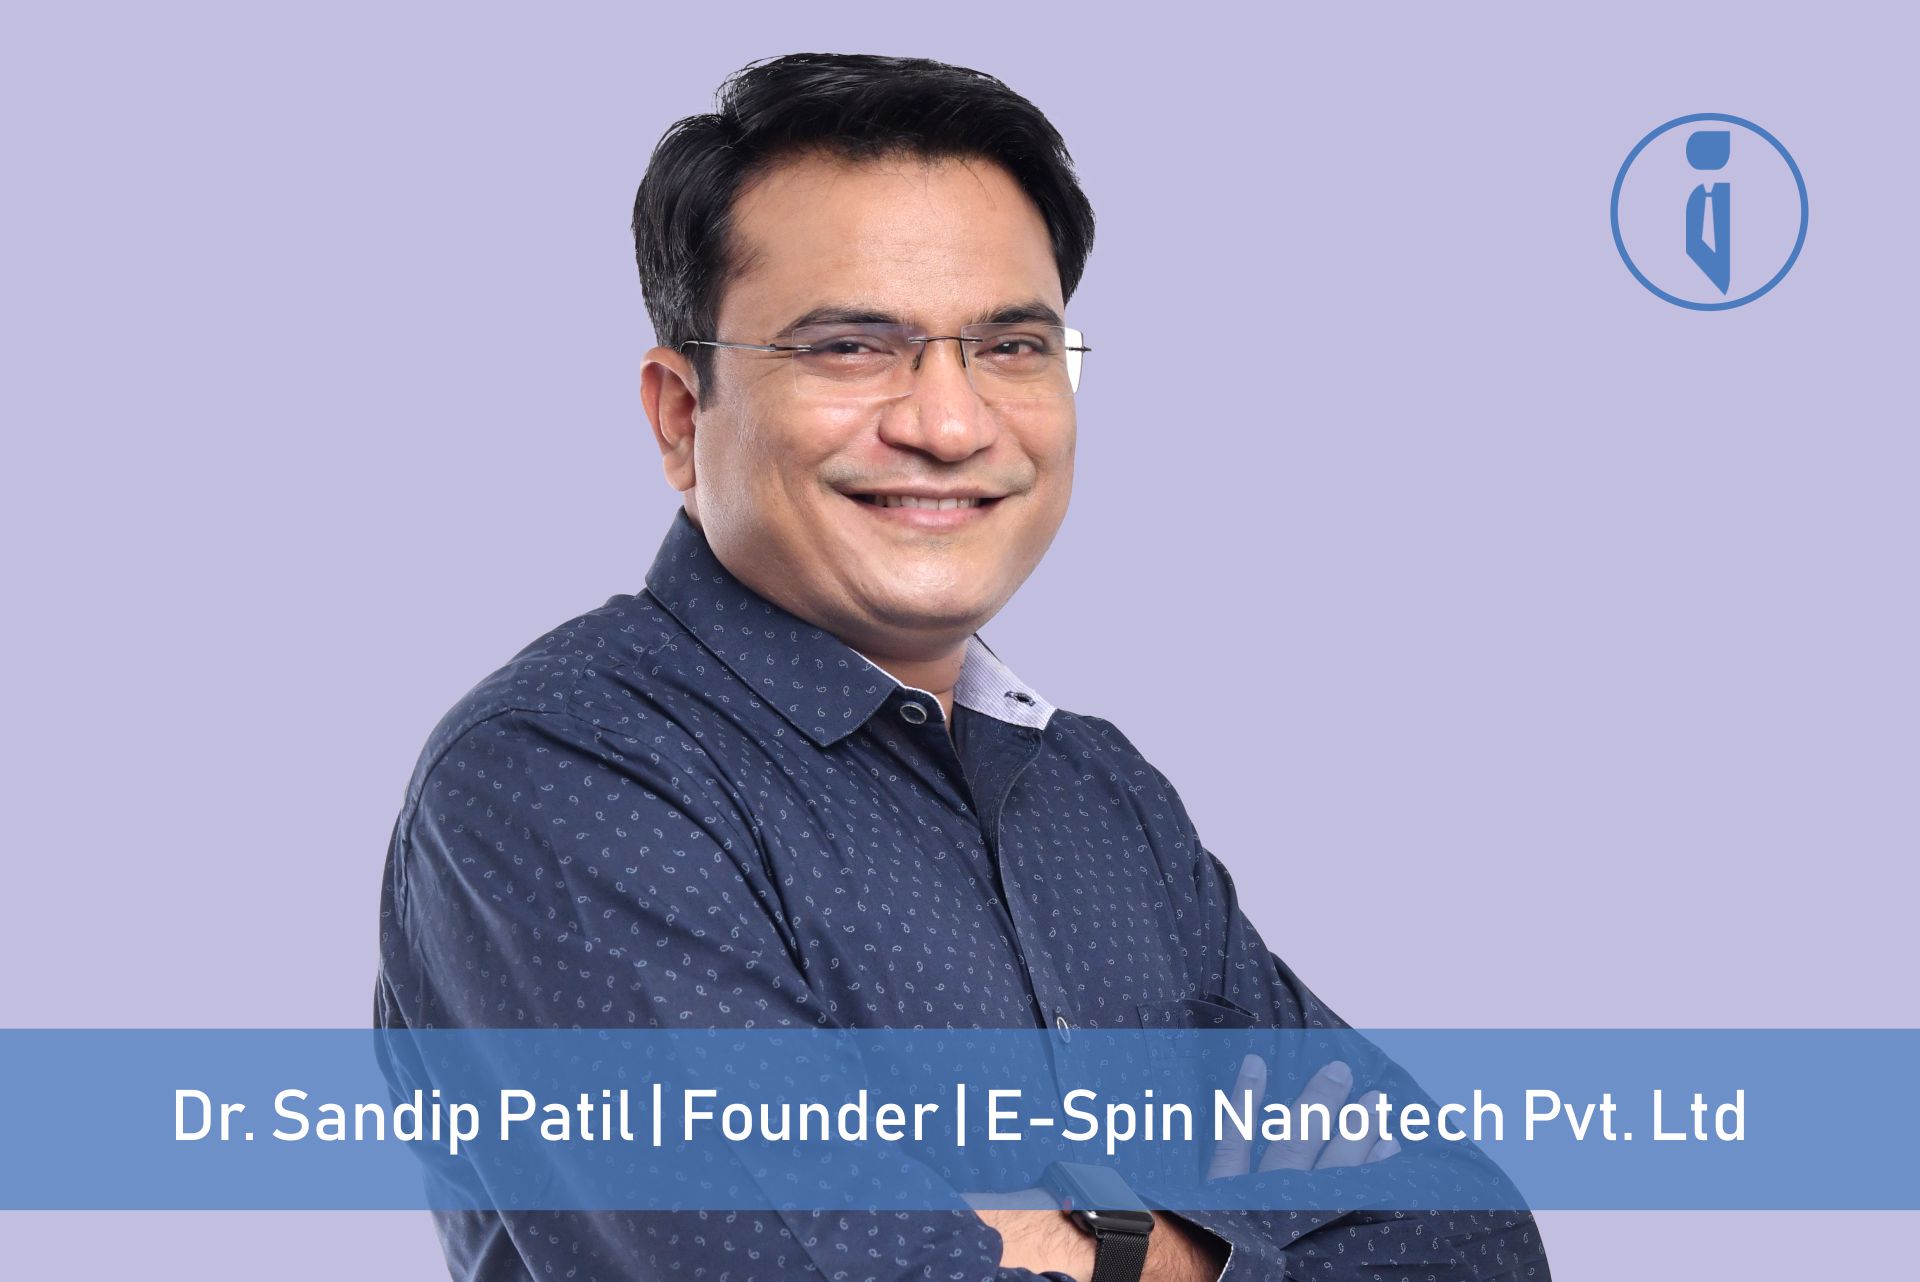 Sandip Patil: An Inspiration for Millions of Visionaries